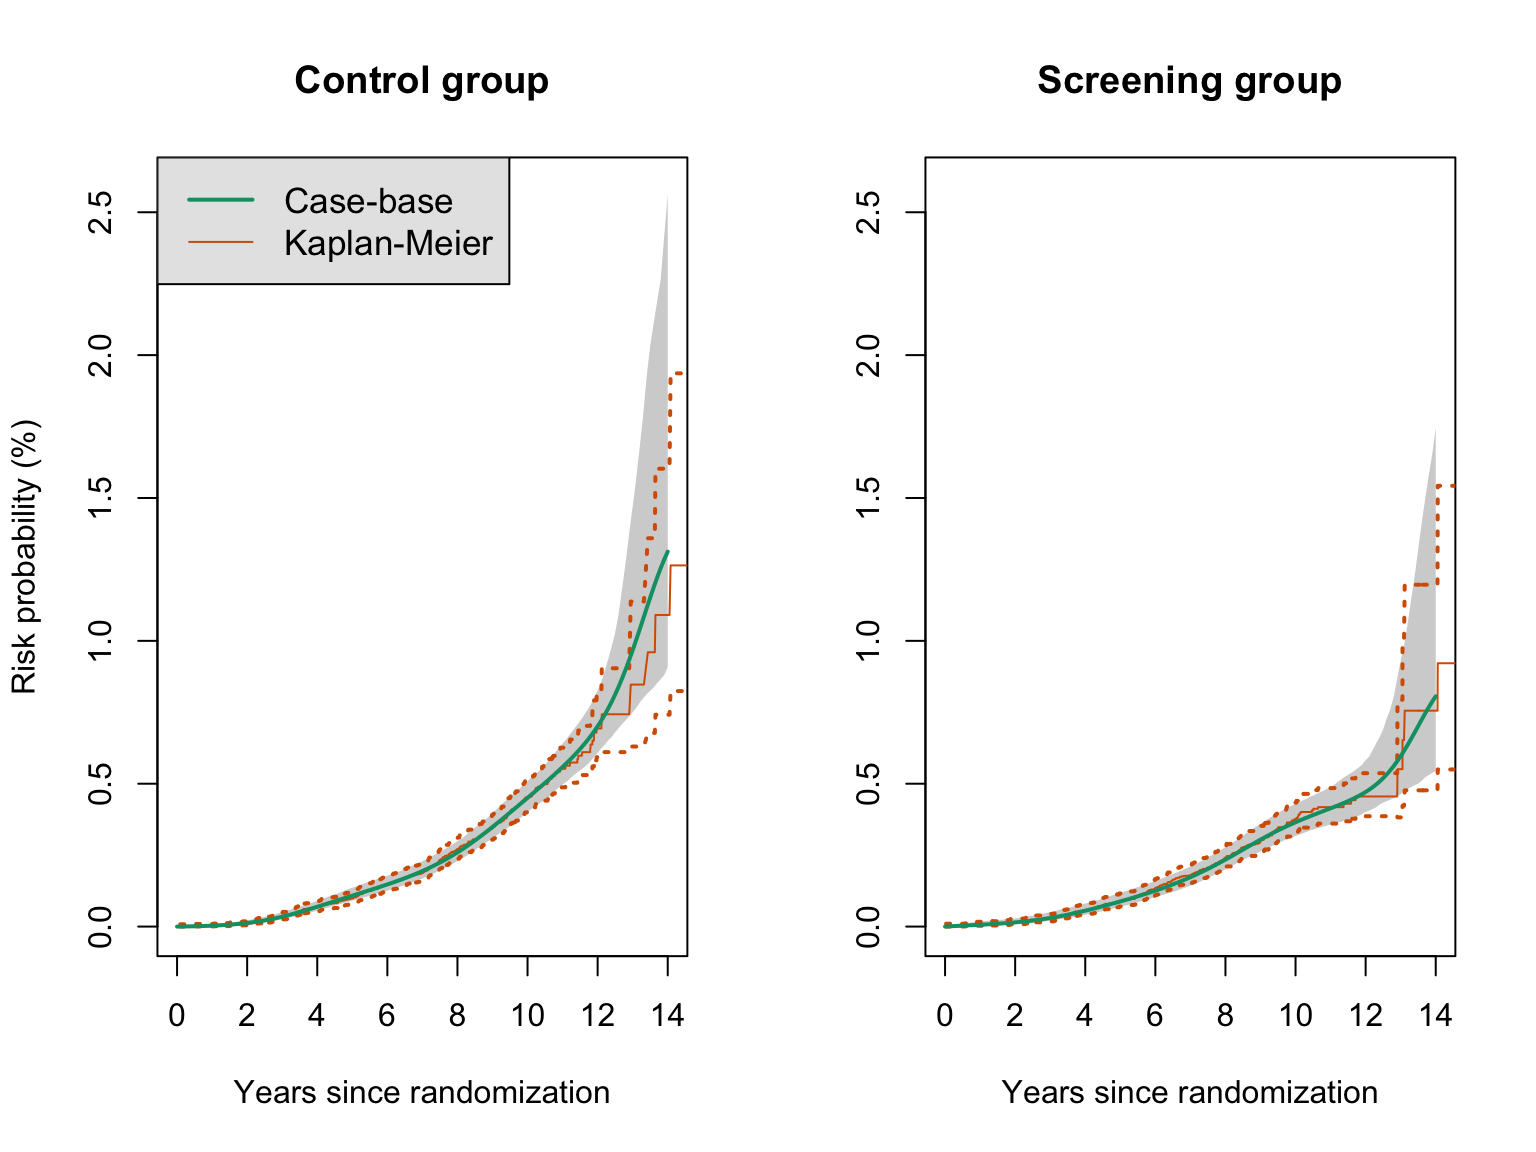 Risk function estimates for control and screening groups in the ERSPC data using case-base sampling and Kaplan-Meier, along with 95\% confidence bands. The smooth curve (case-base sampling) vs. step function (Cox model) highlight one of the main differences between the two approaches. The larger confidence bands in the later years is due to the relatively few number of individuals who were followed for more than 12 years.